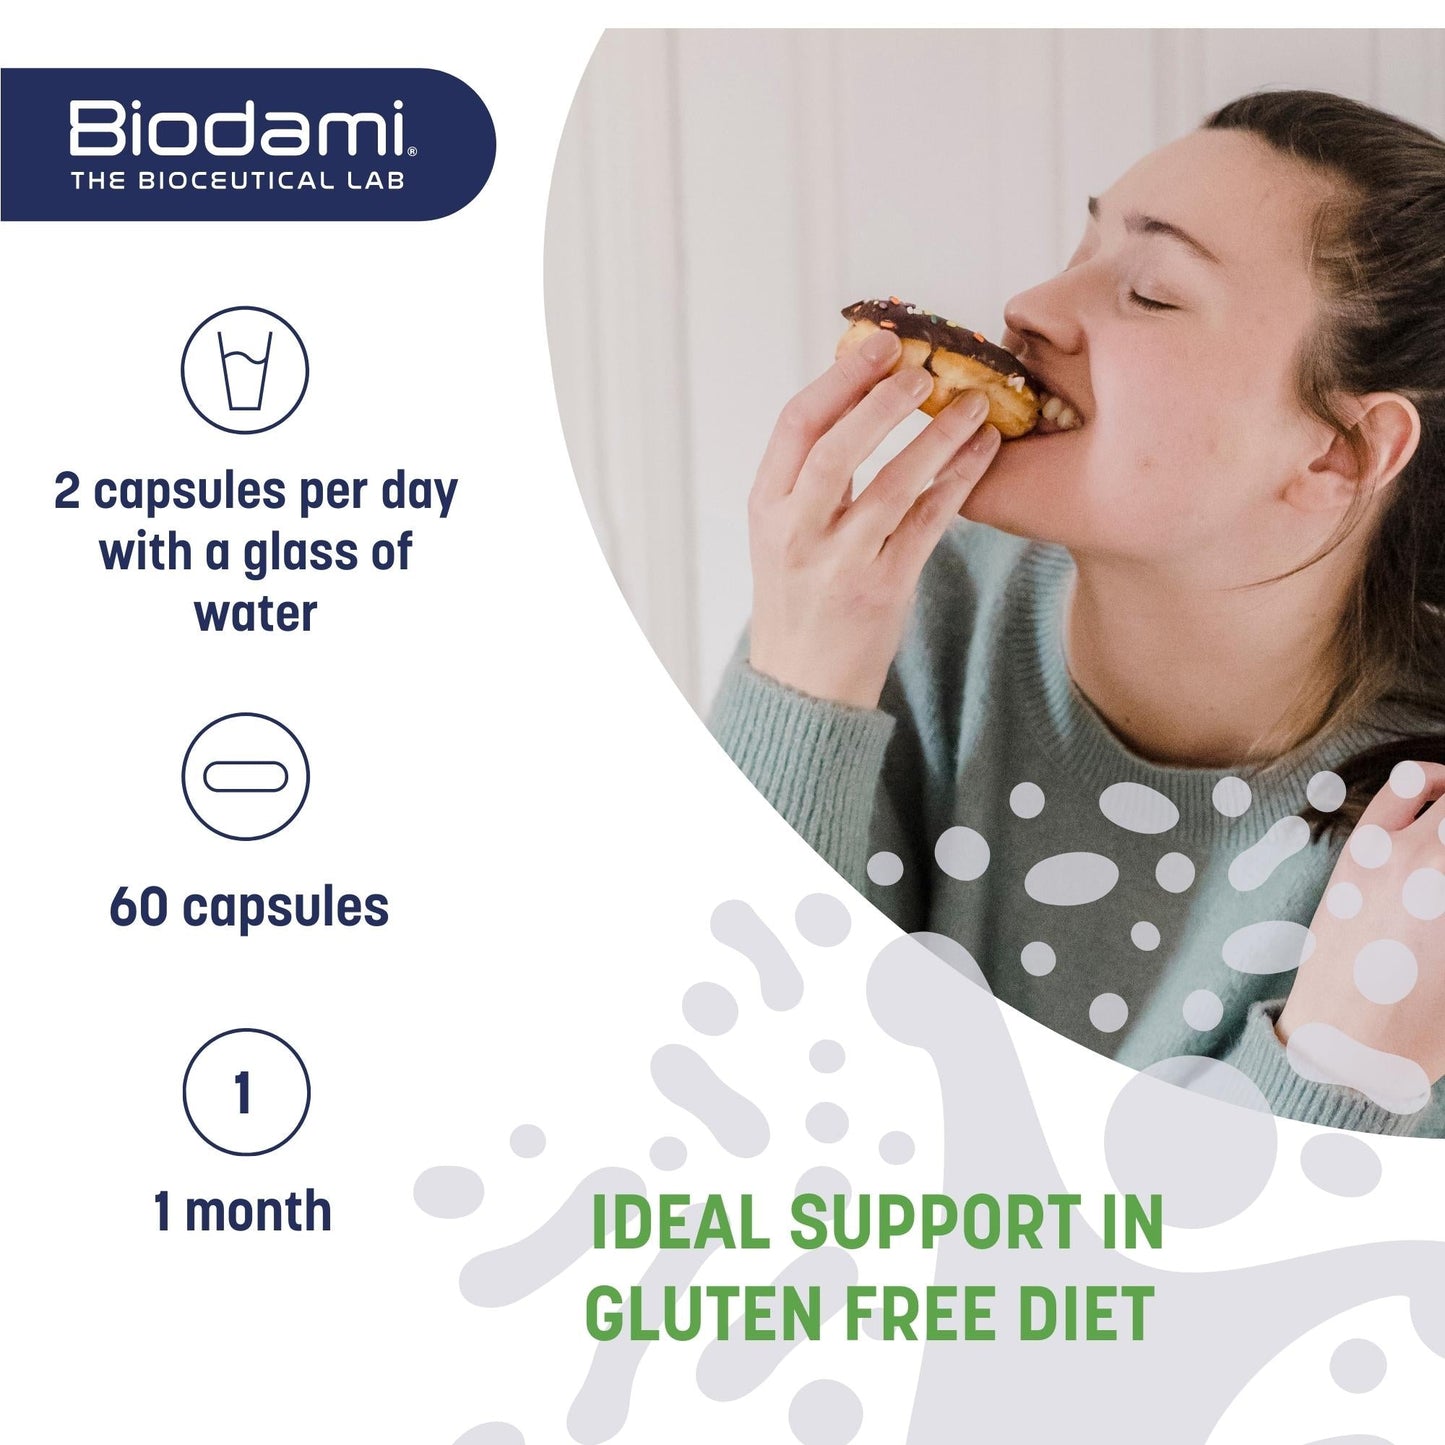 biodami gluten redux probiotic capsule with instructions of use. 2 capsules per day. ideal support in gluten free diet  woman enjying gluten food